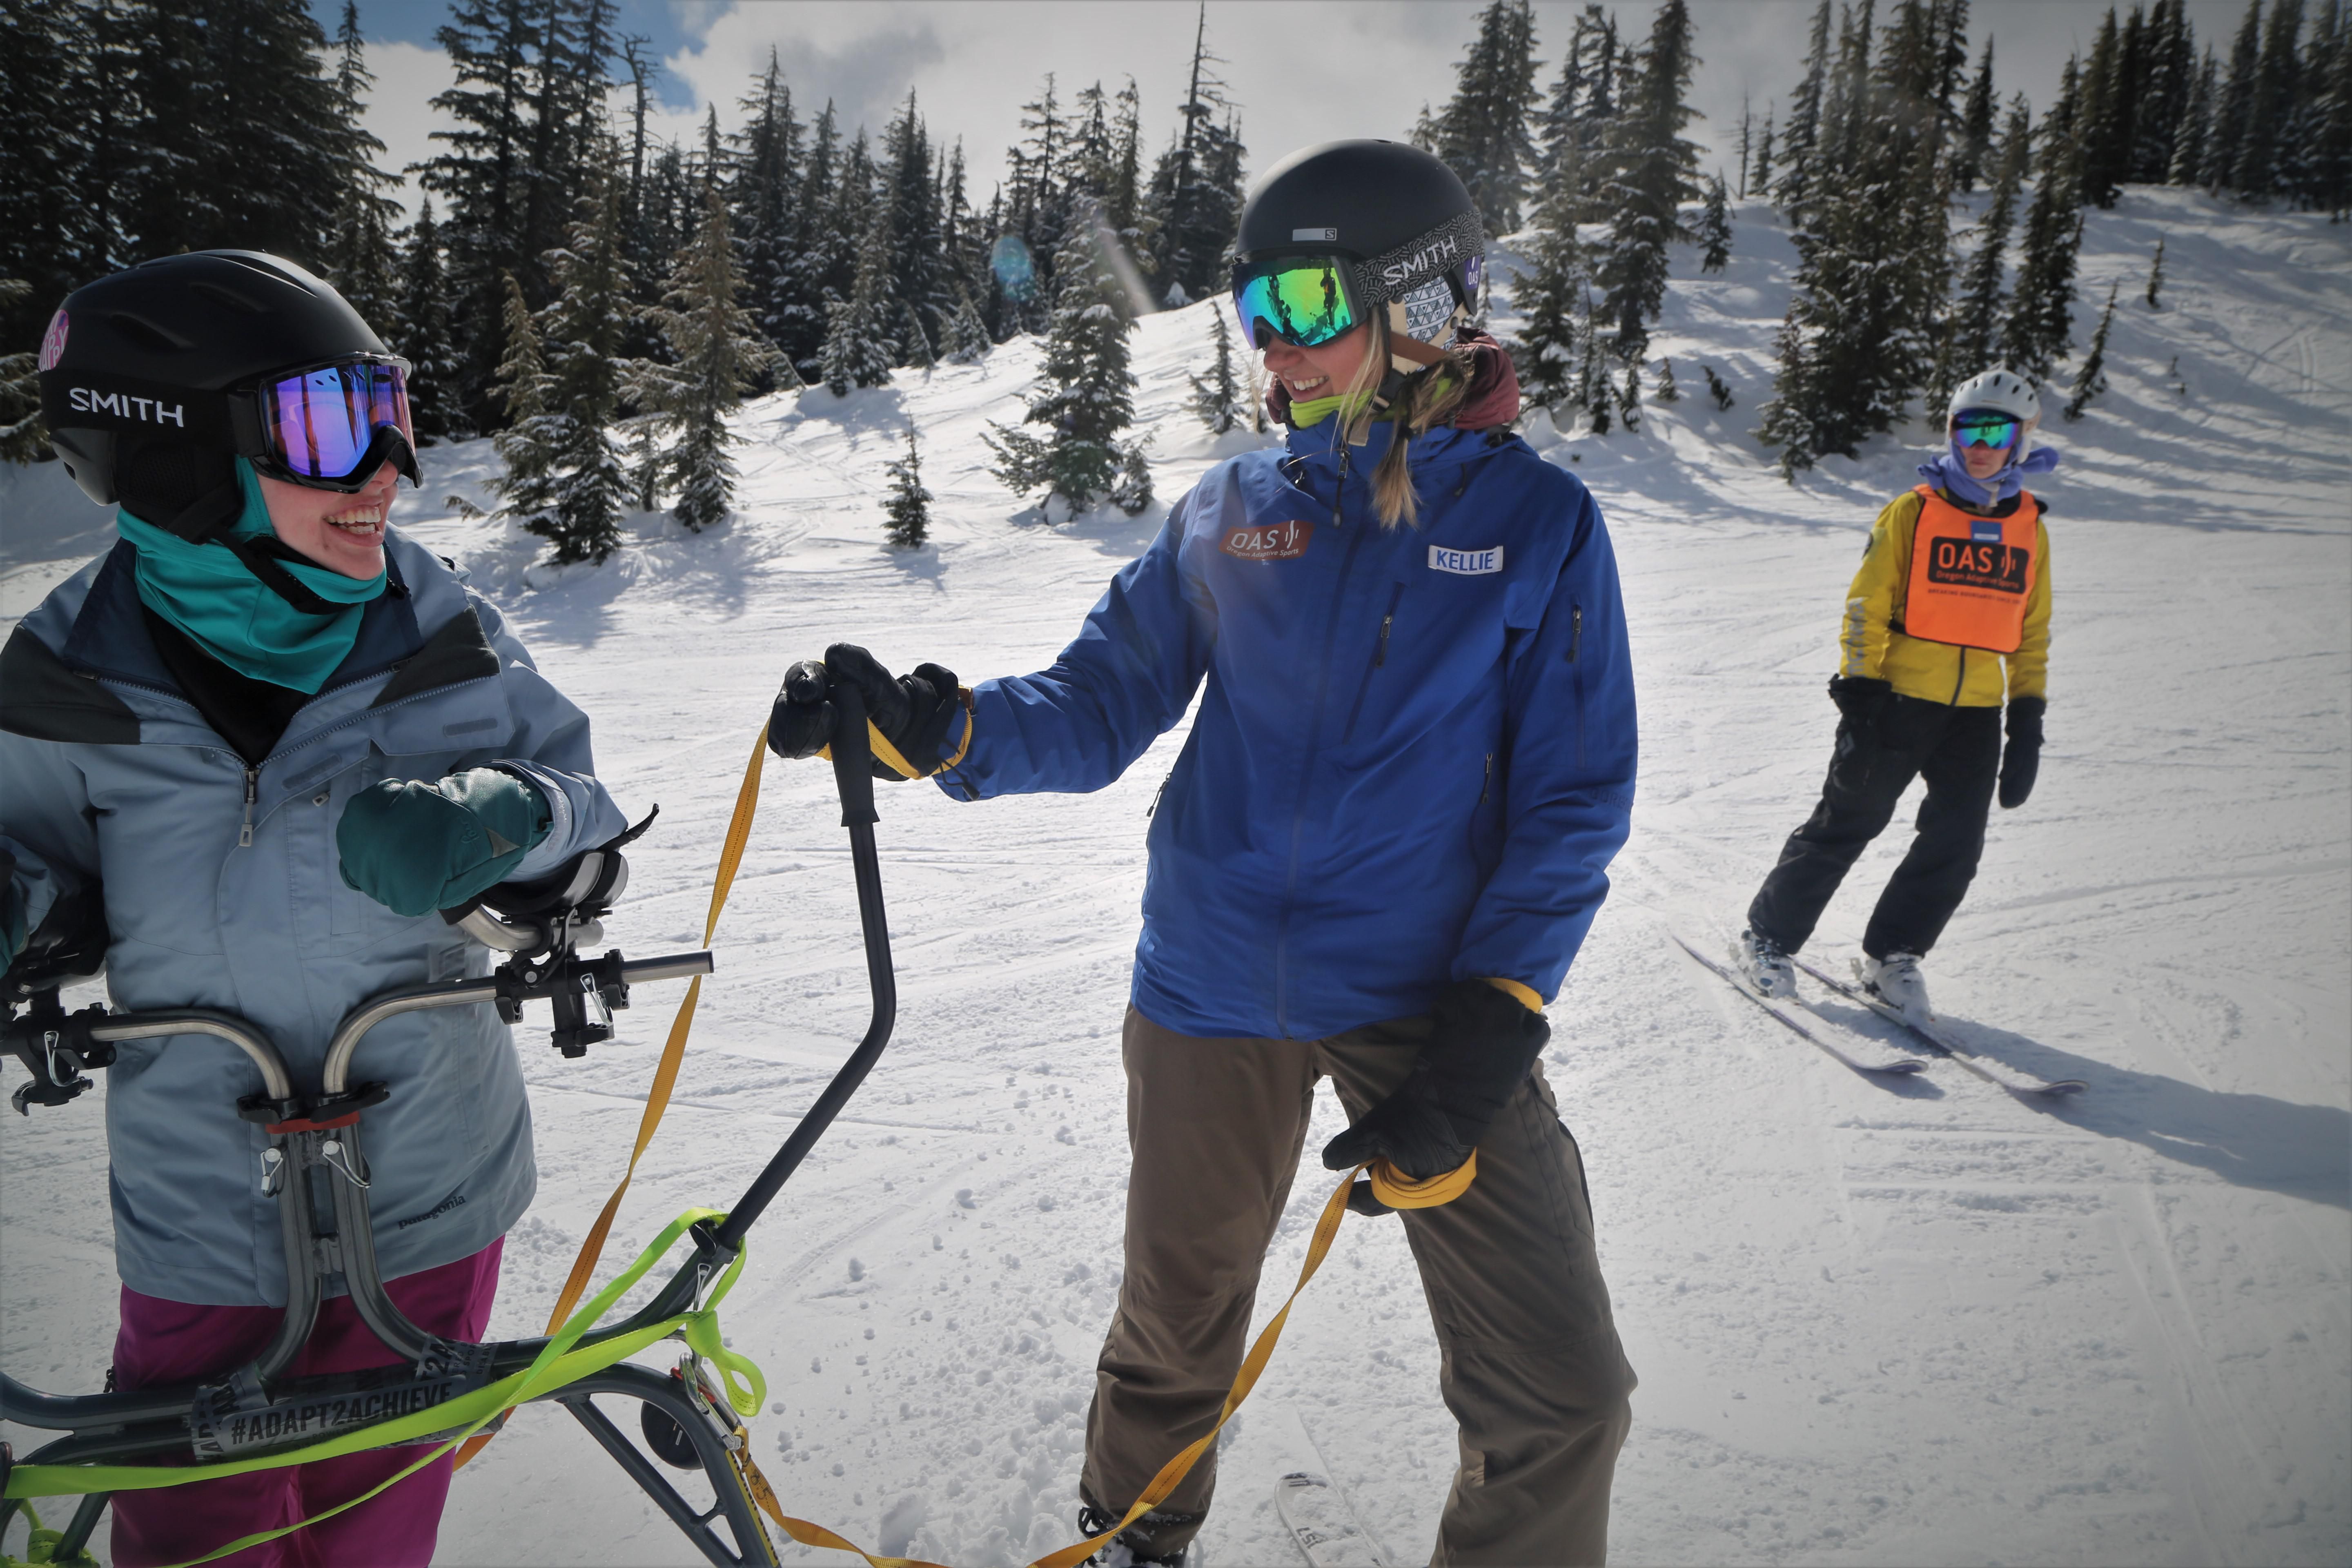 Mount Bachelor's adaptive skiing offers access to all - OPB